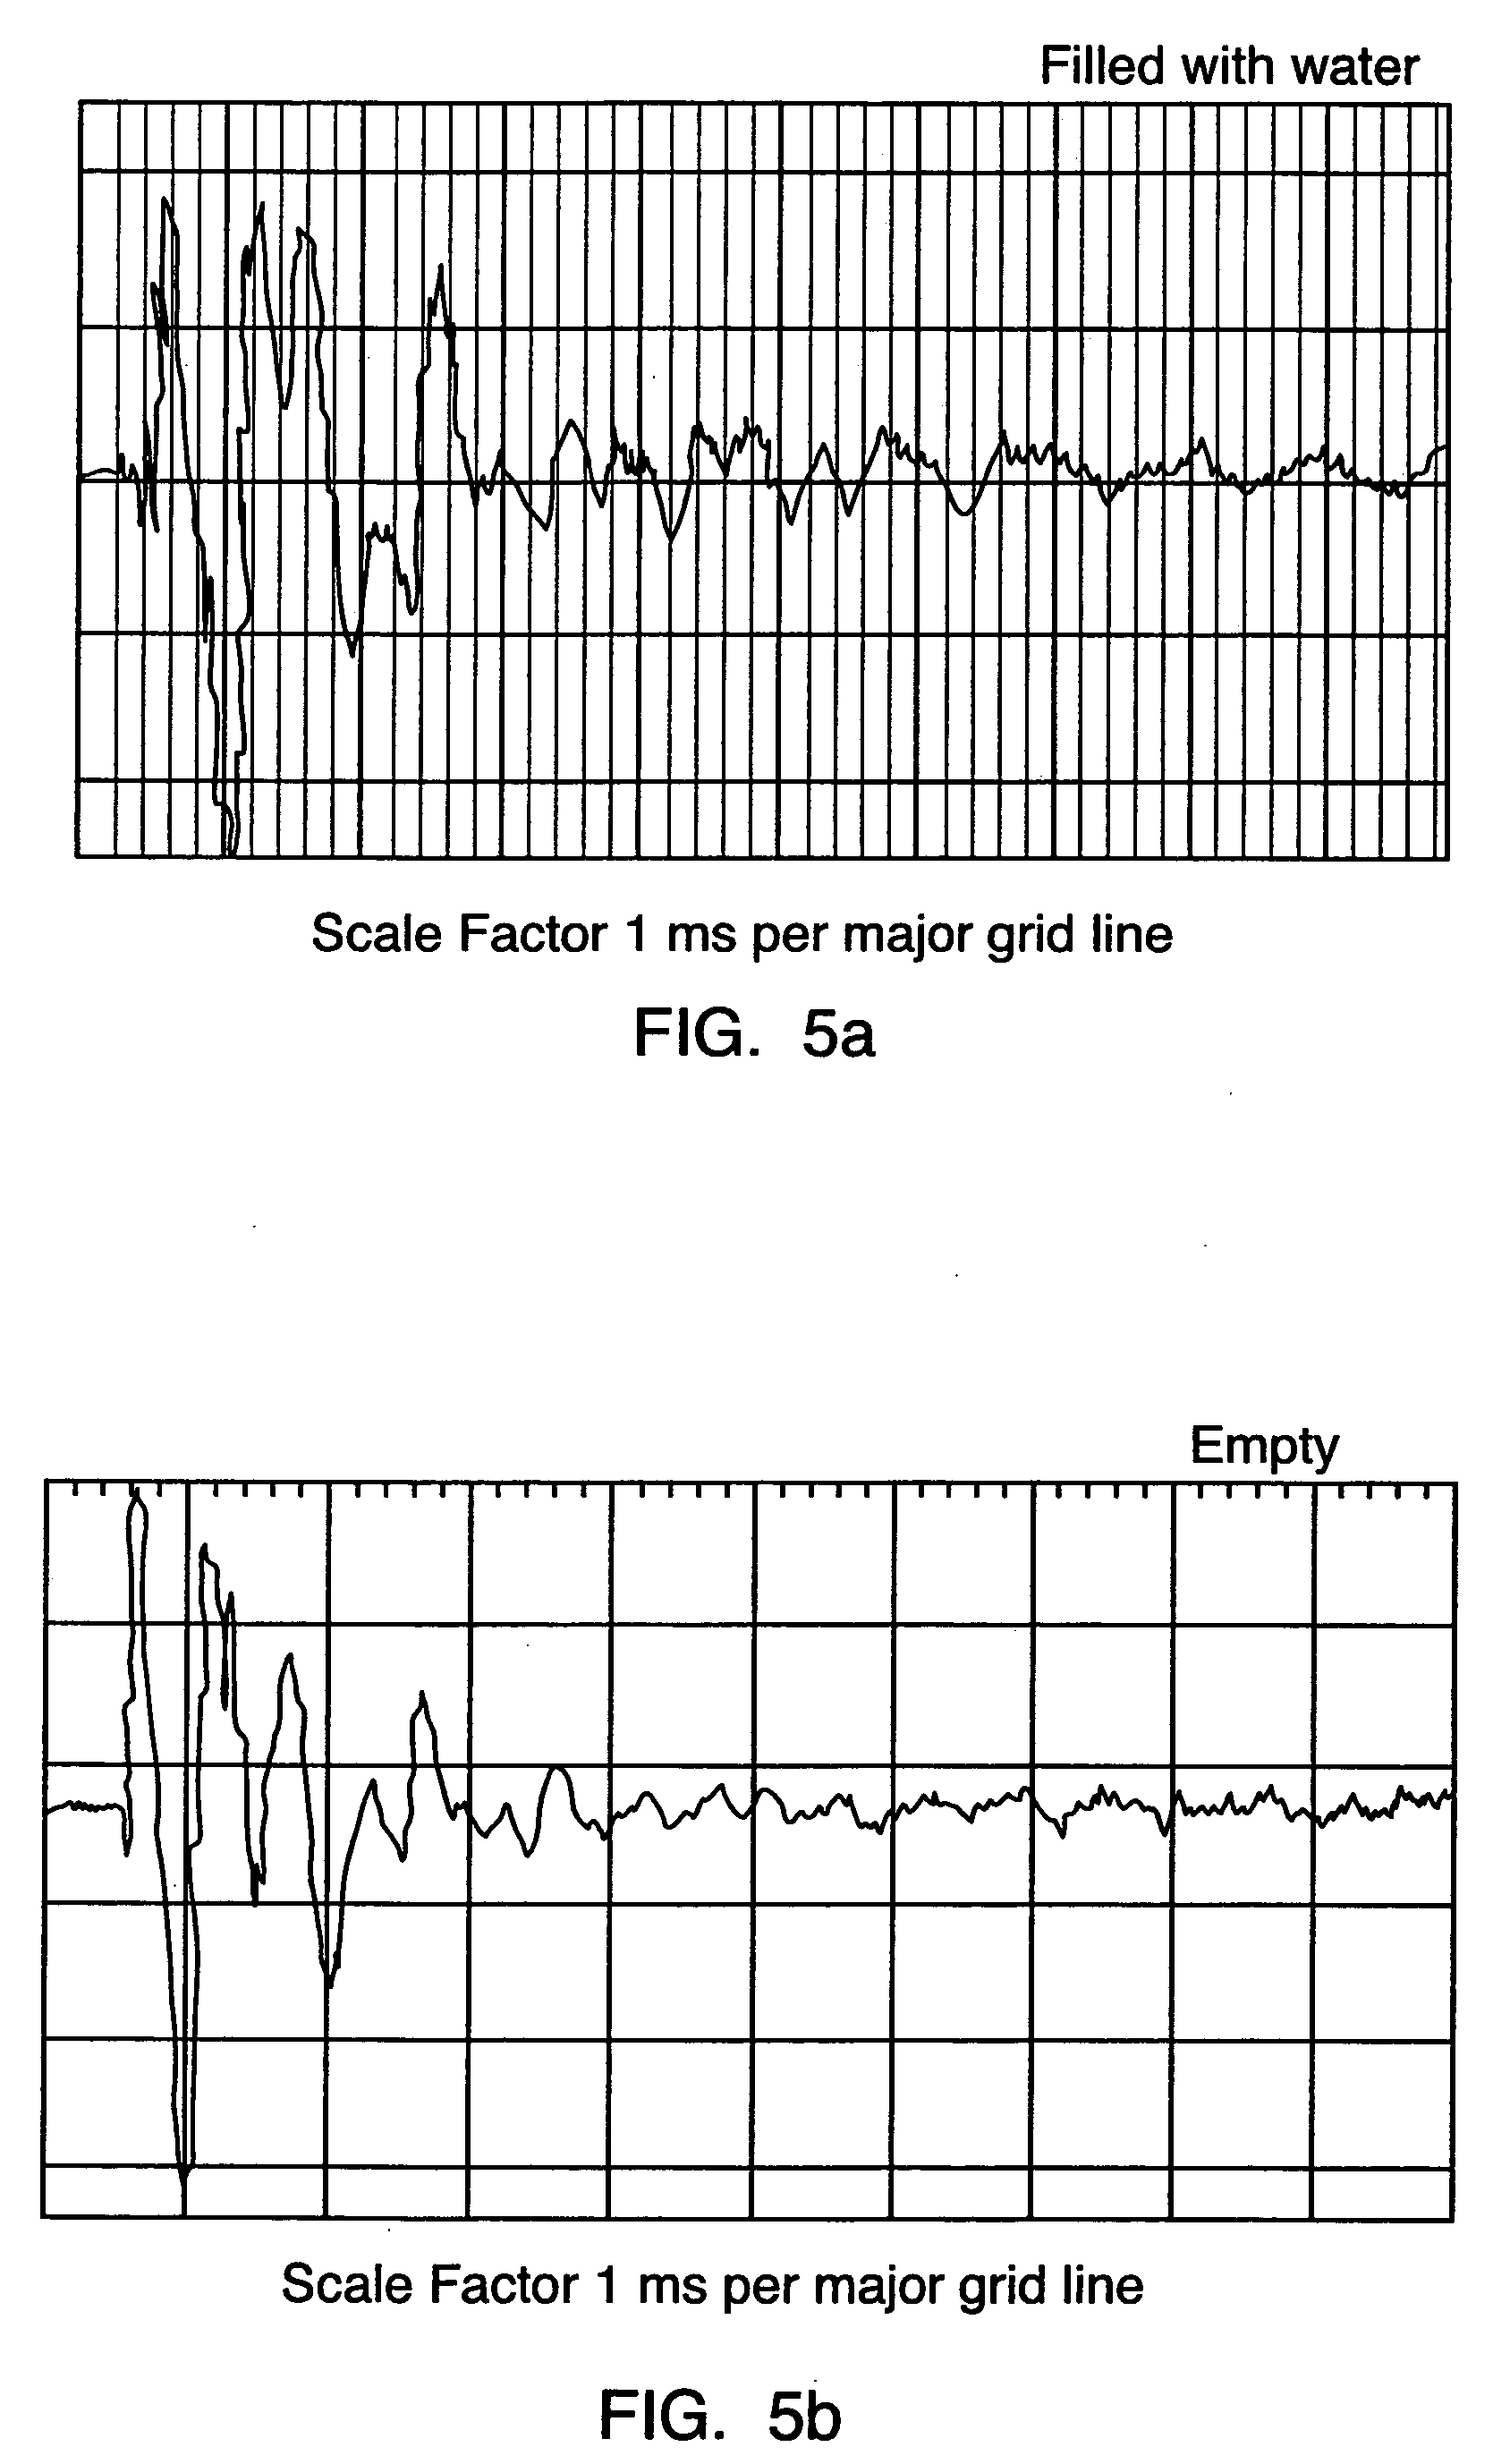 Non-invasive method for detecting and measuring filling material in vessels